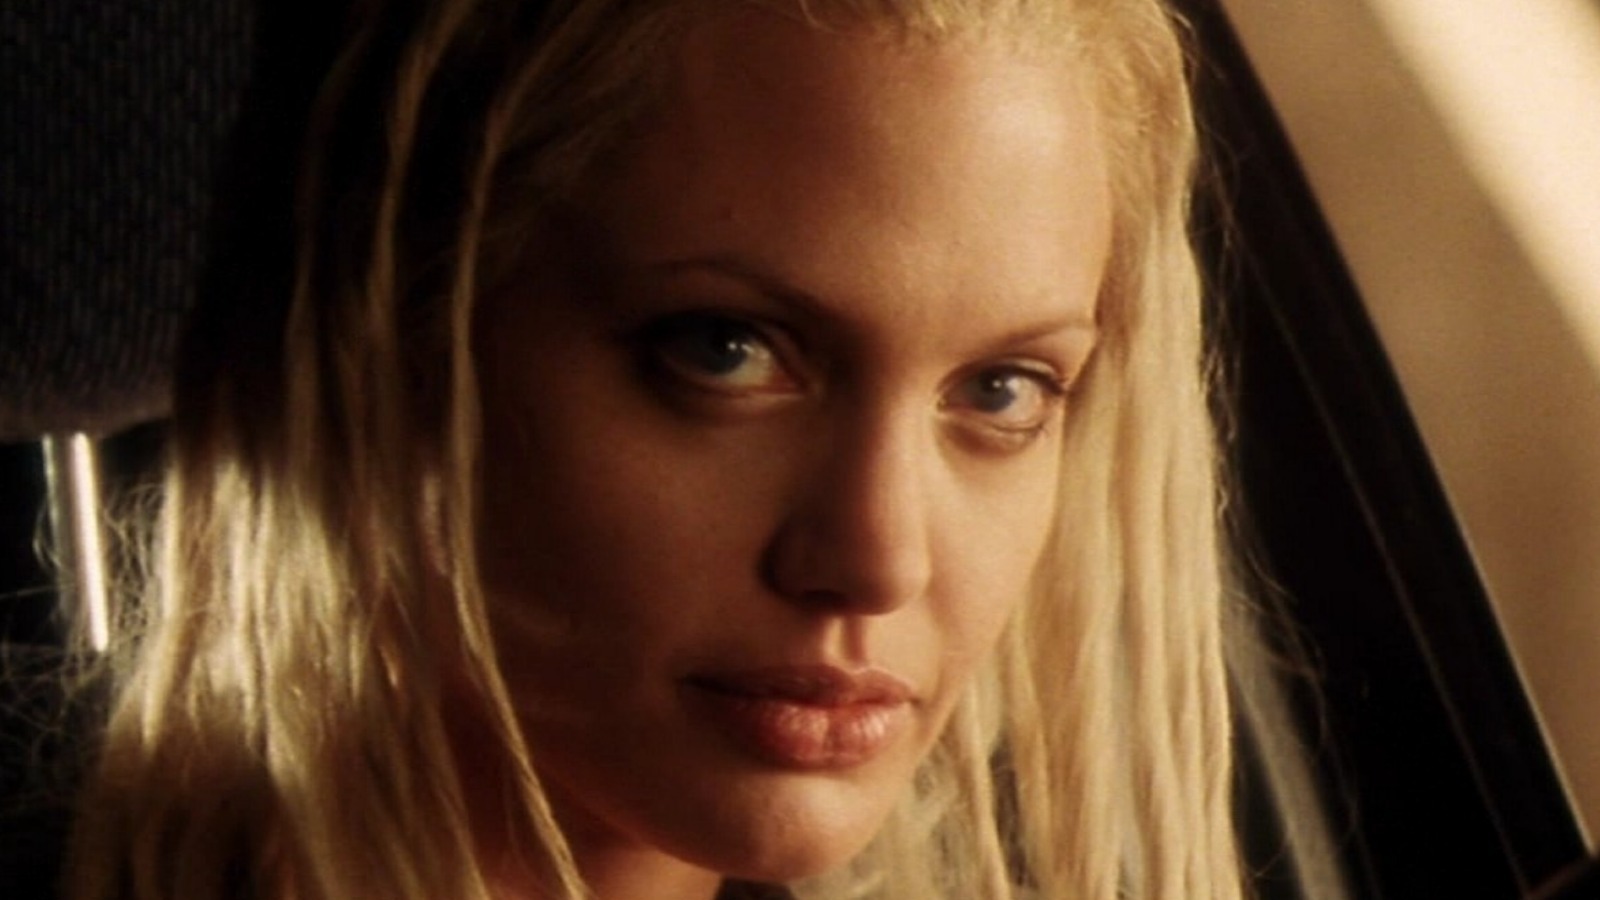 Angelina Jolie Xvideo - The 15 Best Angelina Jolie Movies Ranked